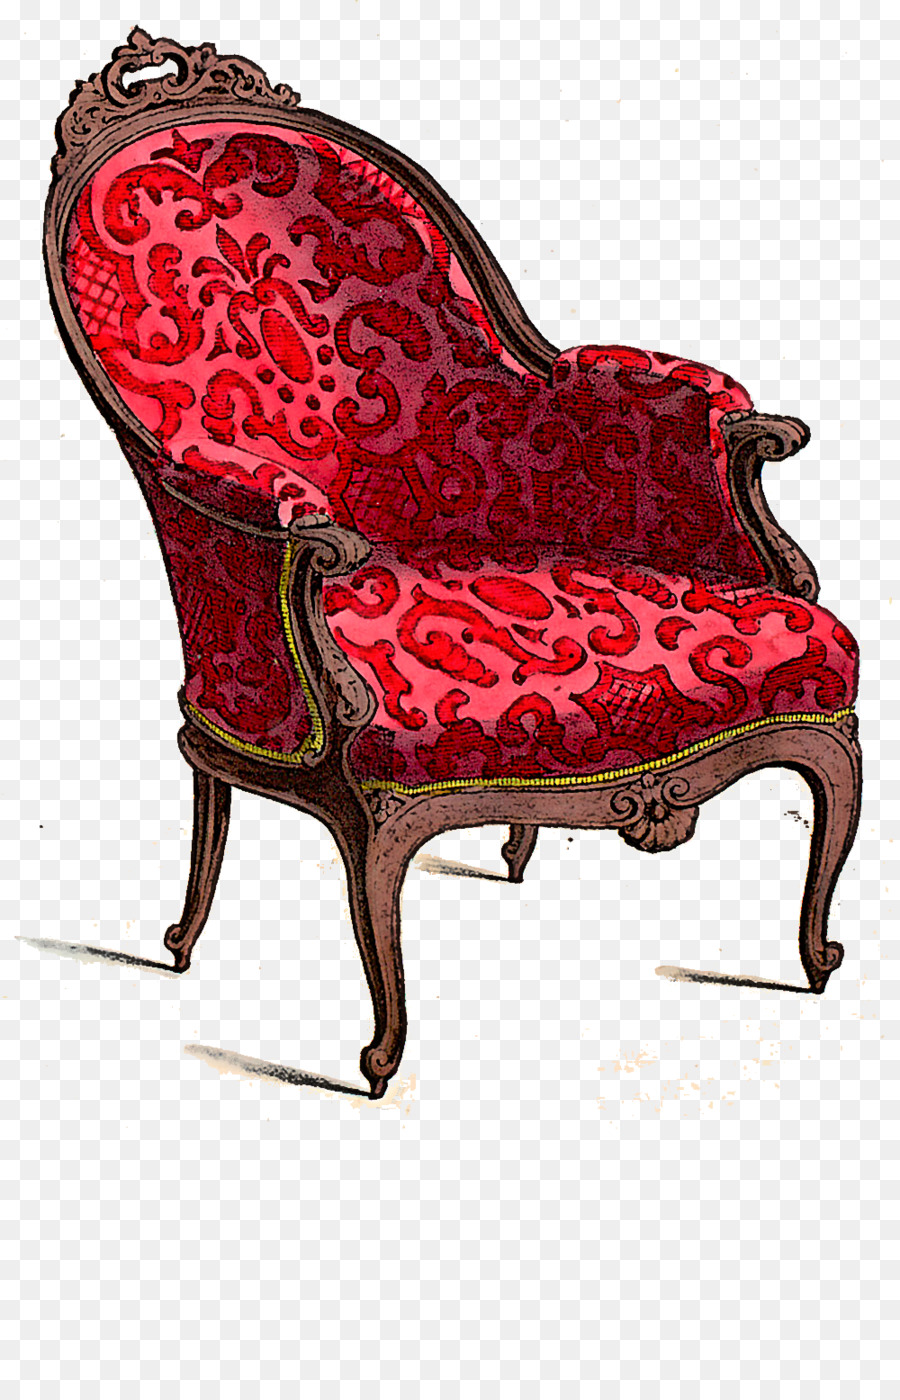 furniture chair red plant classic